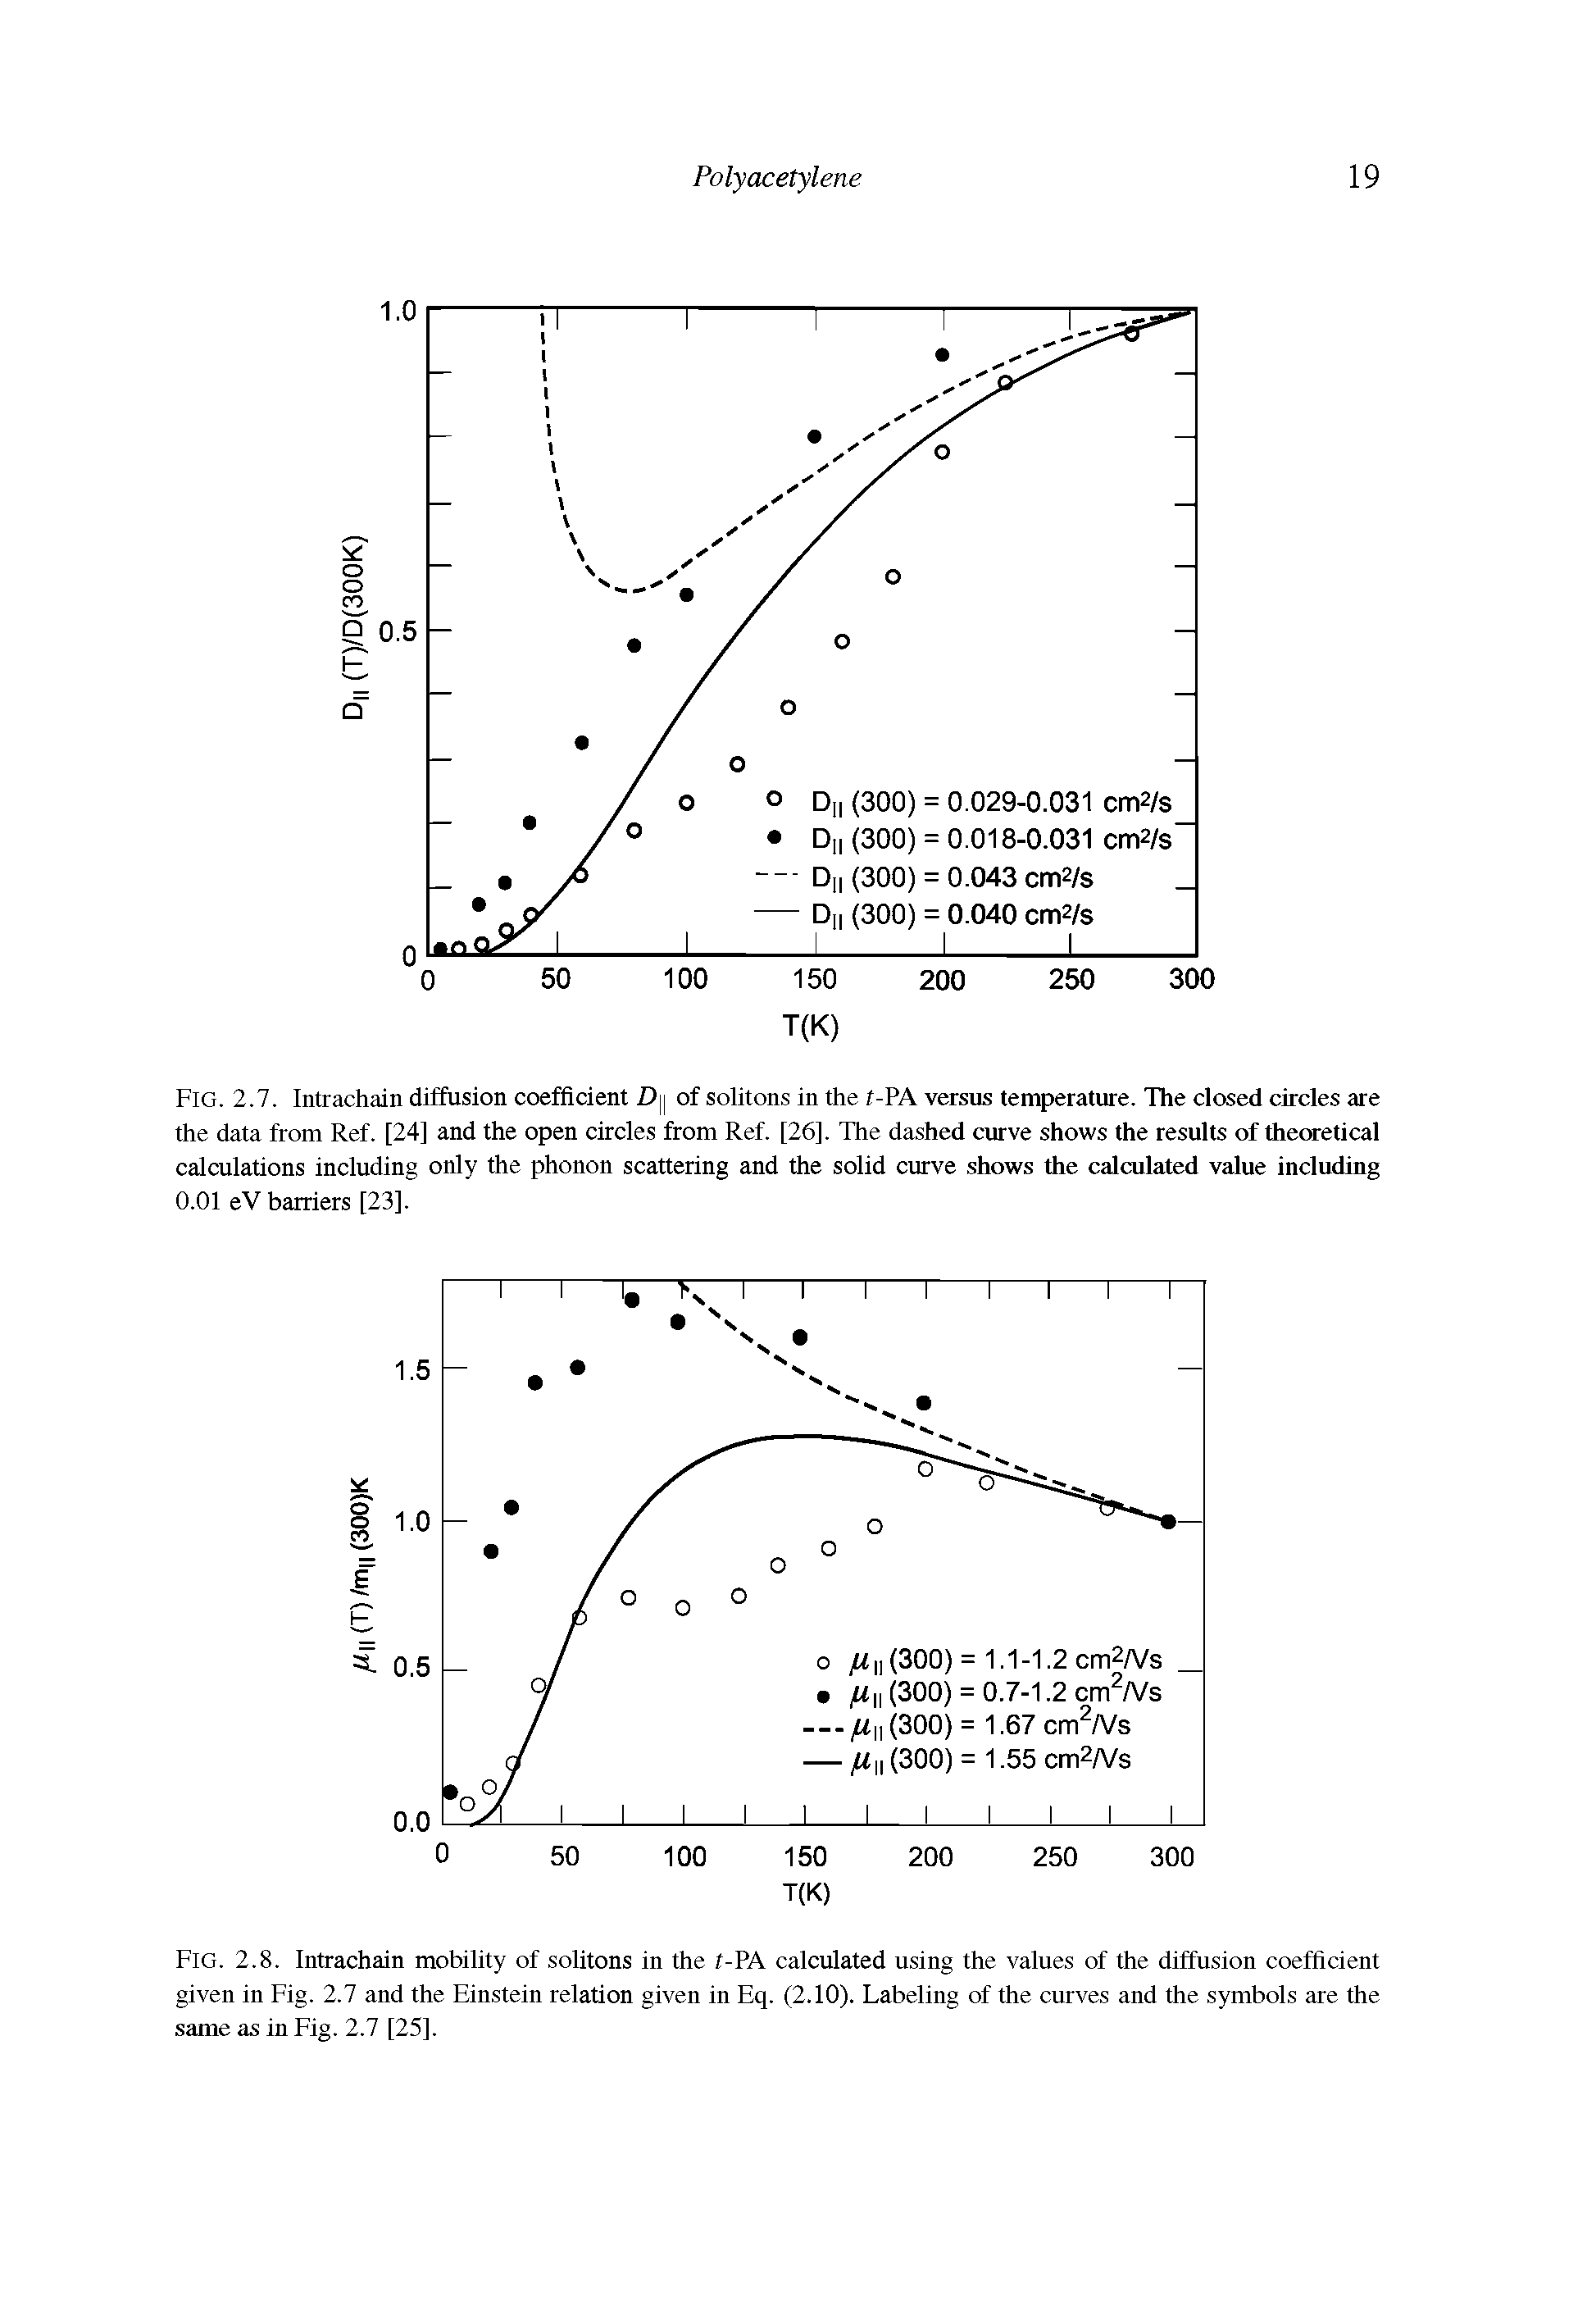 Fig. 2.7. Intrachain diffusion coefficient of solitons in the t-PA versus temperature. The closed circles are the data from Ref. [24] and the open circles from Ref. [26], The dashed curve shows the results of theoretical calculations including only the phonon scattering and the solid curve shows the calculated value including 0.01 eV barriers [23].